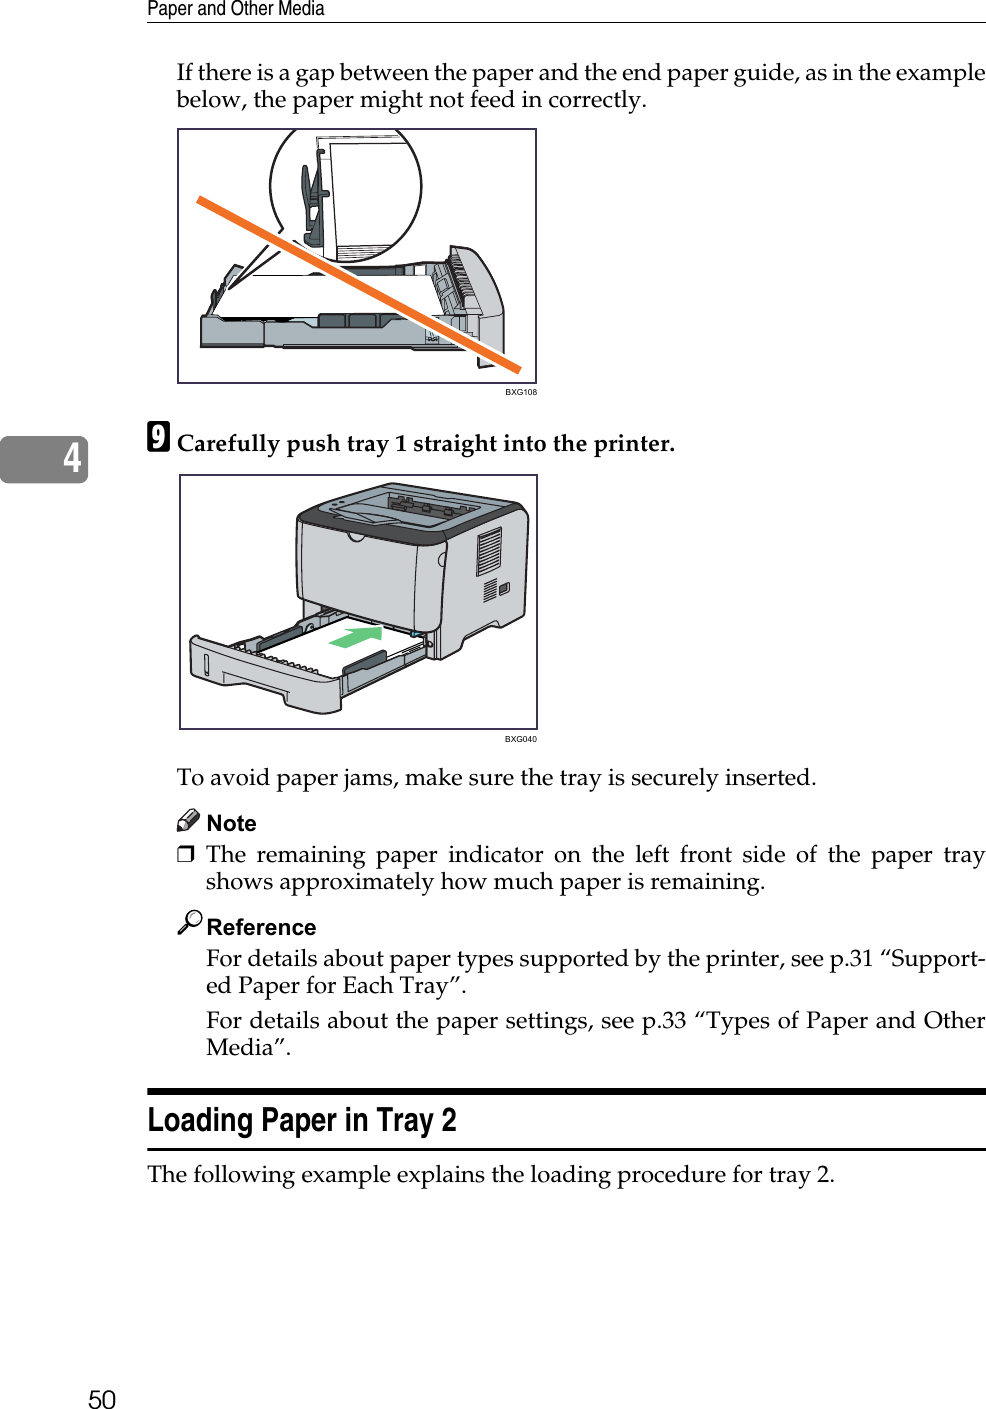 Paper and Other Media504If there is a gap between the paper and the end paper guide, as in the examplebelow, the paper might not feed in correctly.ICarefully push tray 1 straight into the printer.To avoid paper jams, make sure the tray is securely inserted.Note❒The remaining paper indicator on the left front side of the paper trayshows approximately how much paper is remaining.ReferenceFor details about paper types supported by the printer, see p.31 “Support-ed Paper for Each Tray”.For details about the paper settings, see p.33 “Types of Paper and OtherMedia”.Loading Paper in Tray 2The following example explains the loading procedure for tray 2.BXG108BXG040